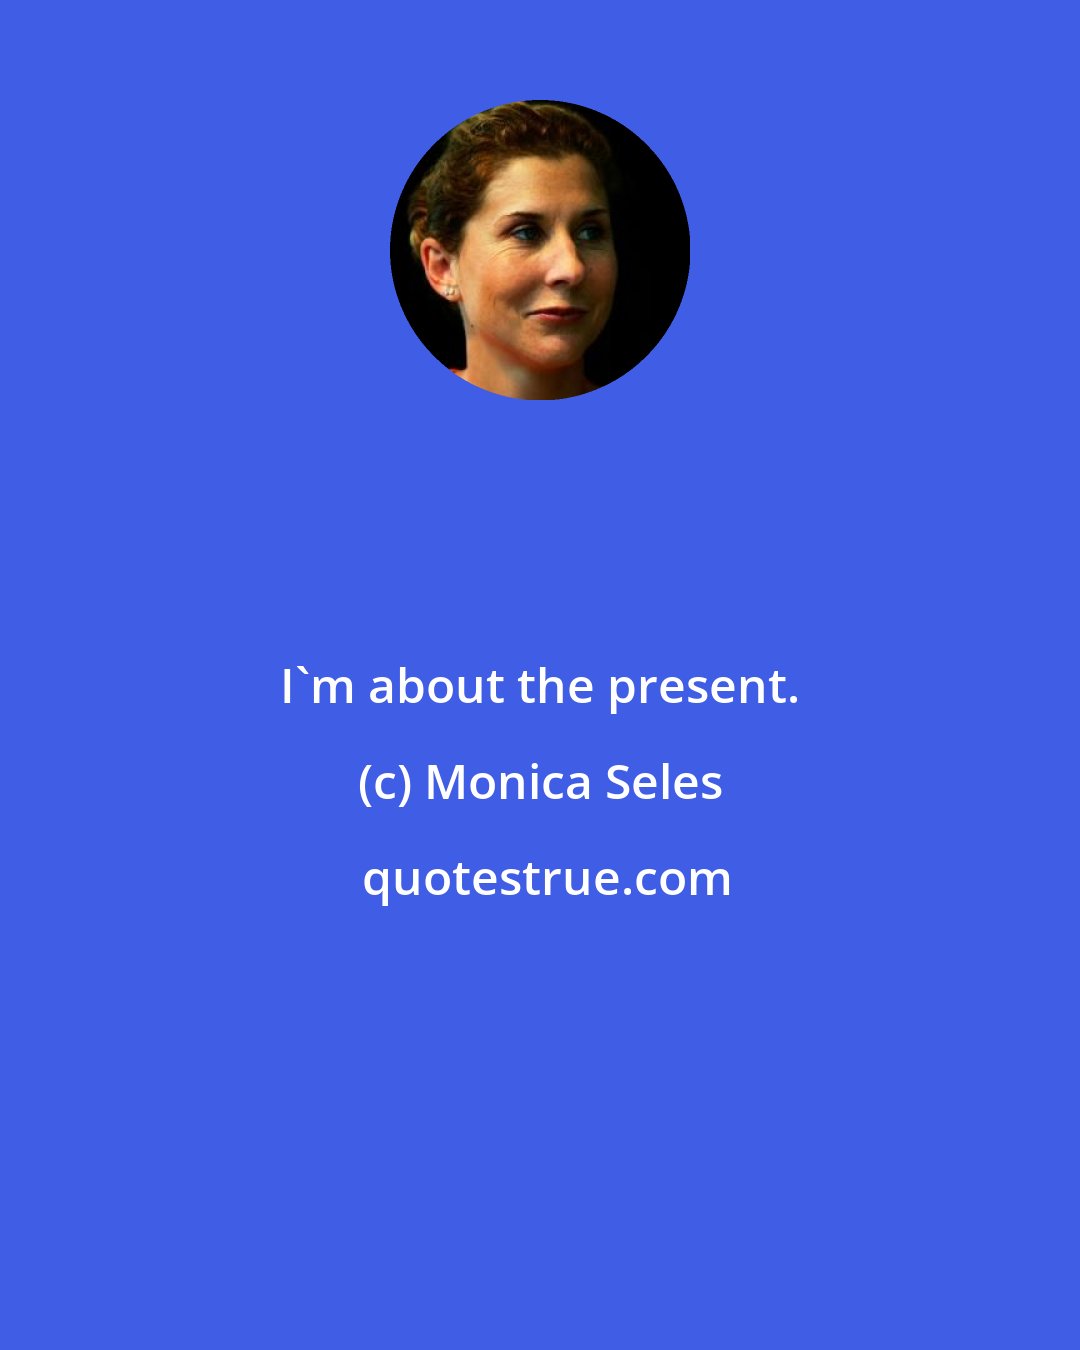 Monica Seles: I'm about the present.